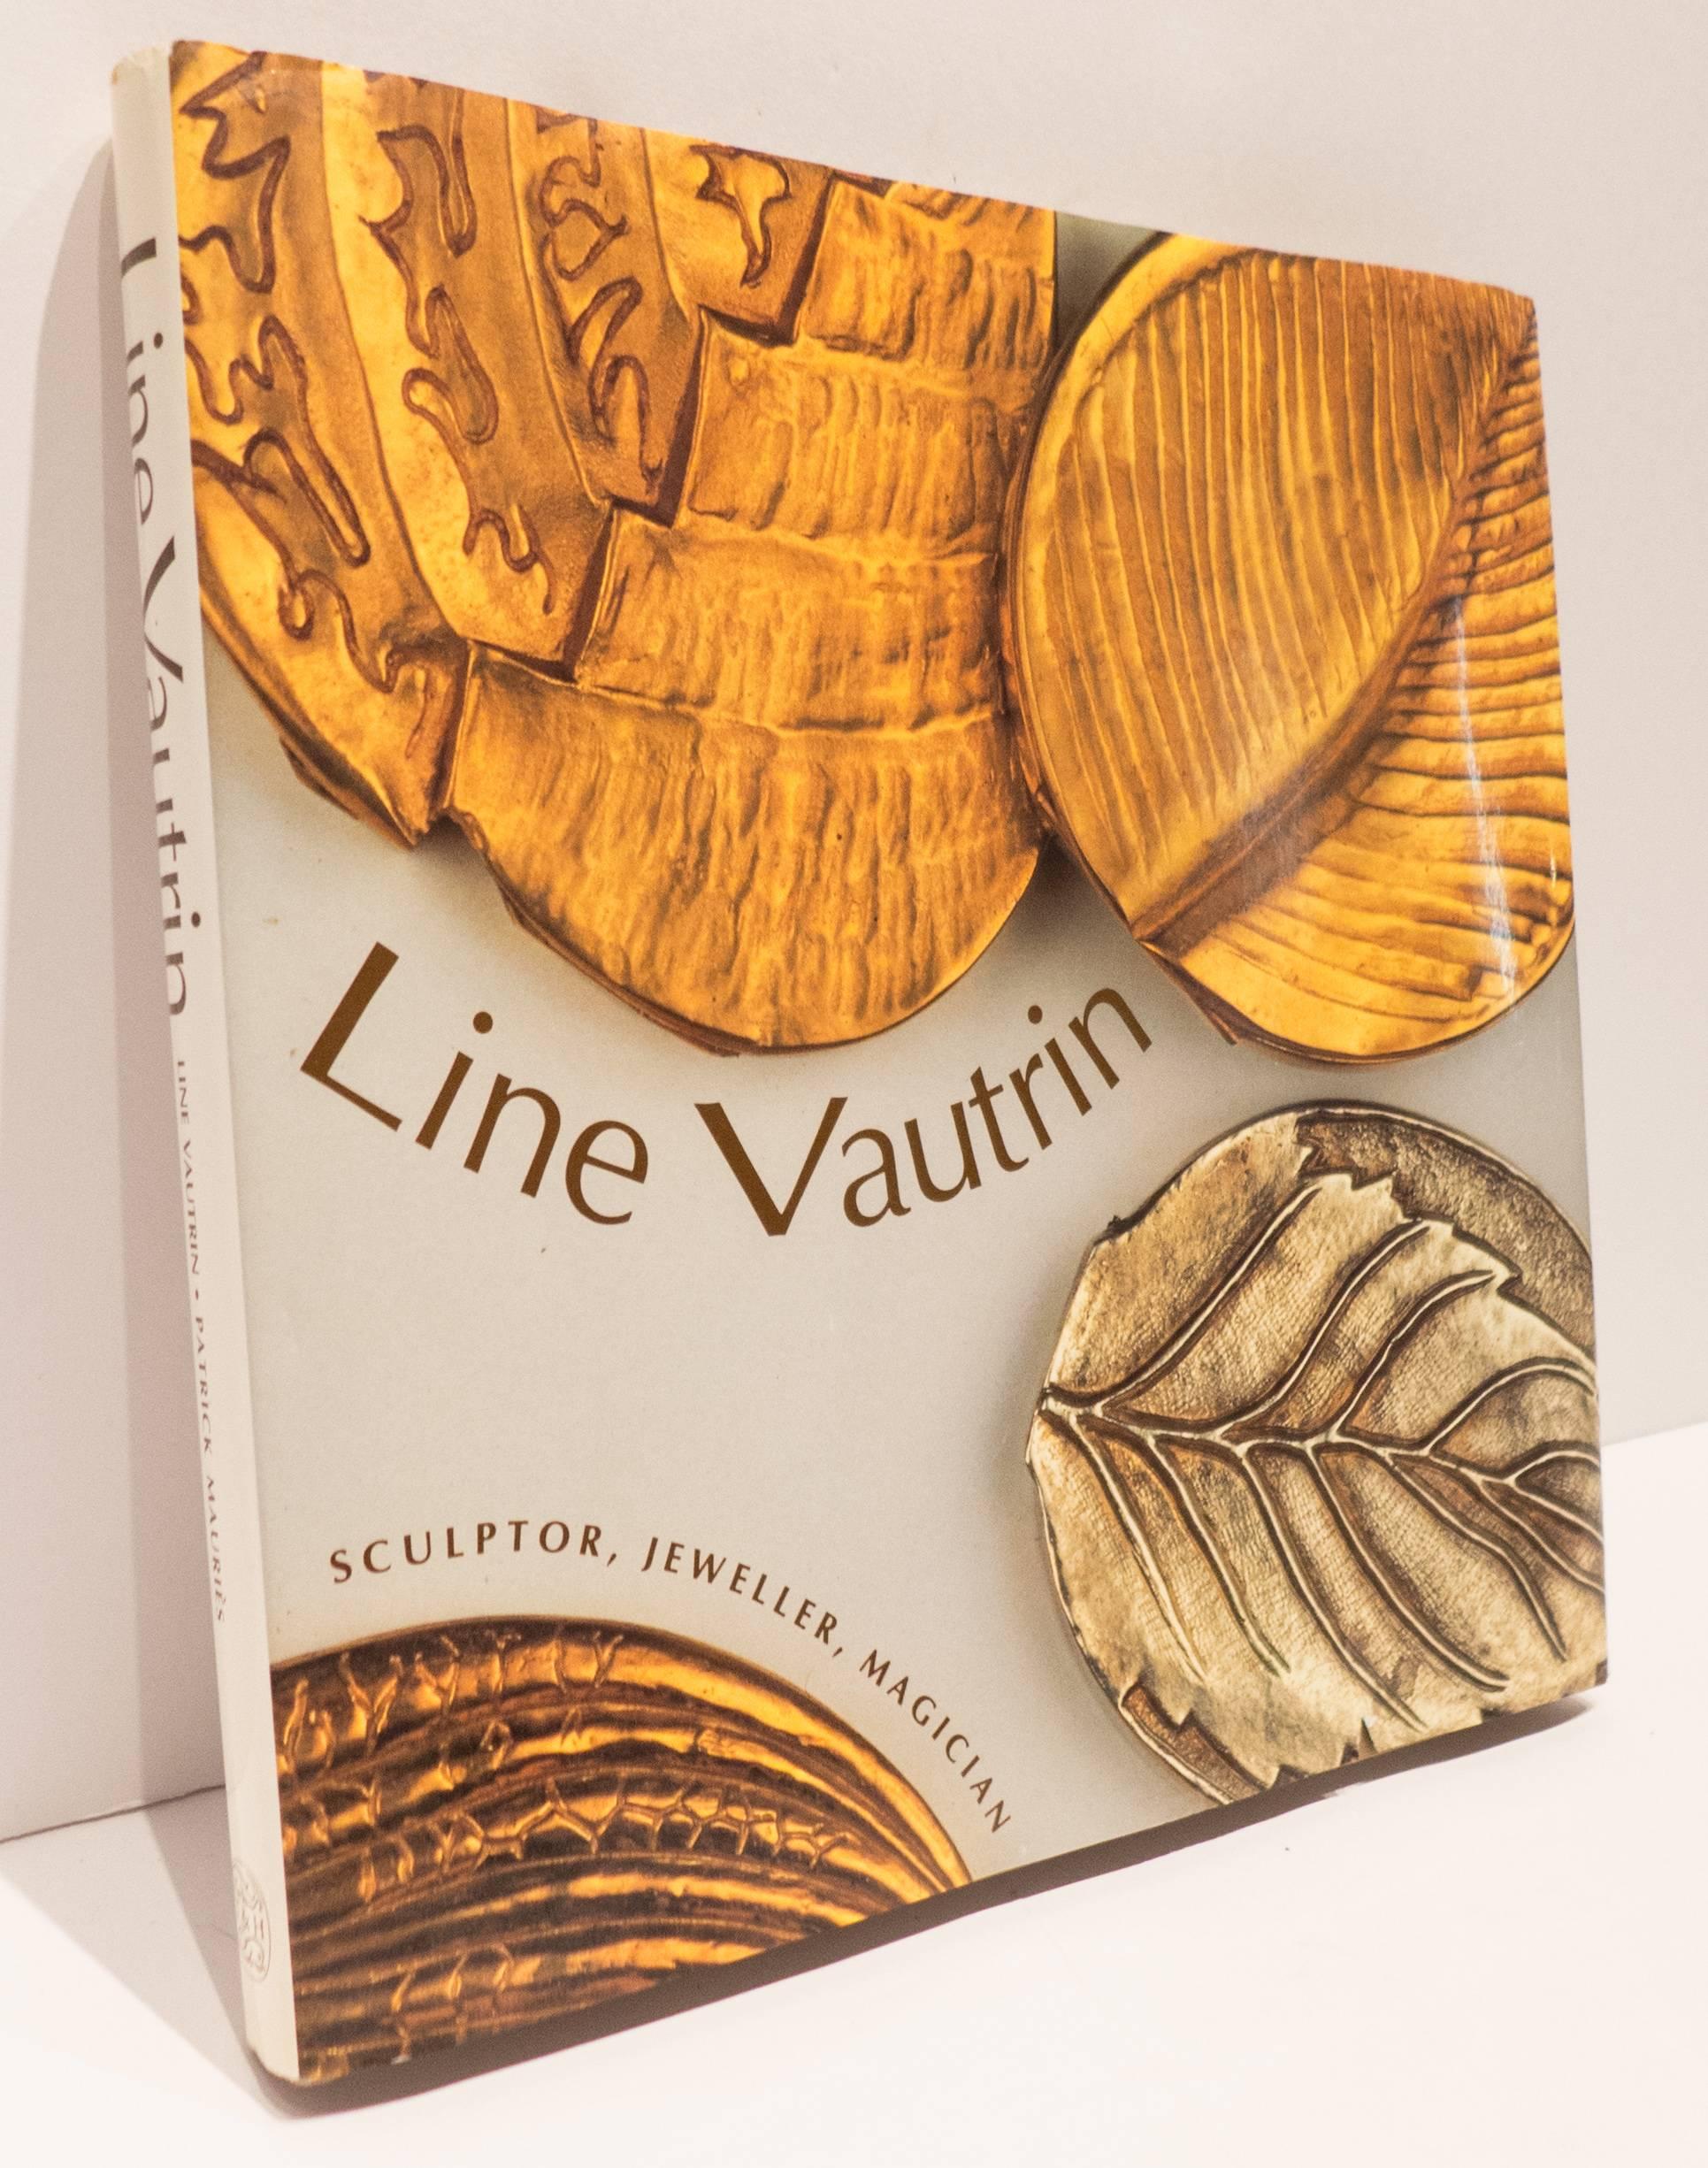 Lin Vautrin: Sculptor, Jeweller, Magician.  First American edition, hardcover in dustjacket, published by Thames and Hudson in 1992.  112 pages, featuring 76 pages of illustrations, 72 of them in color--over 200 objects plus commentaries.  A